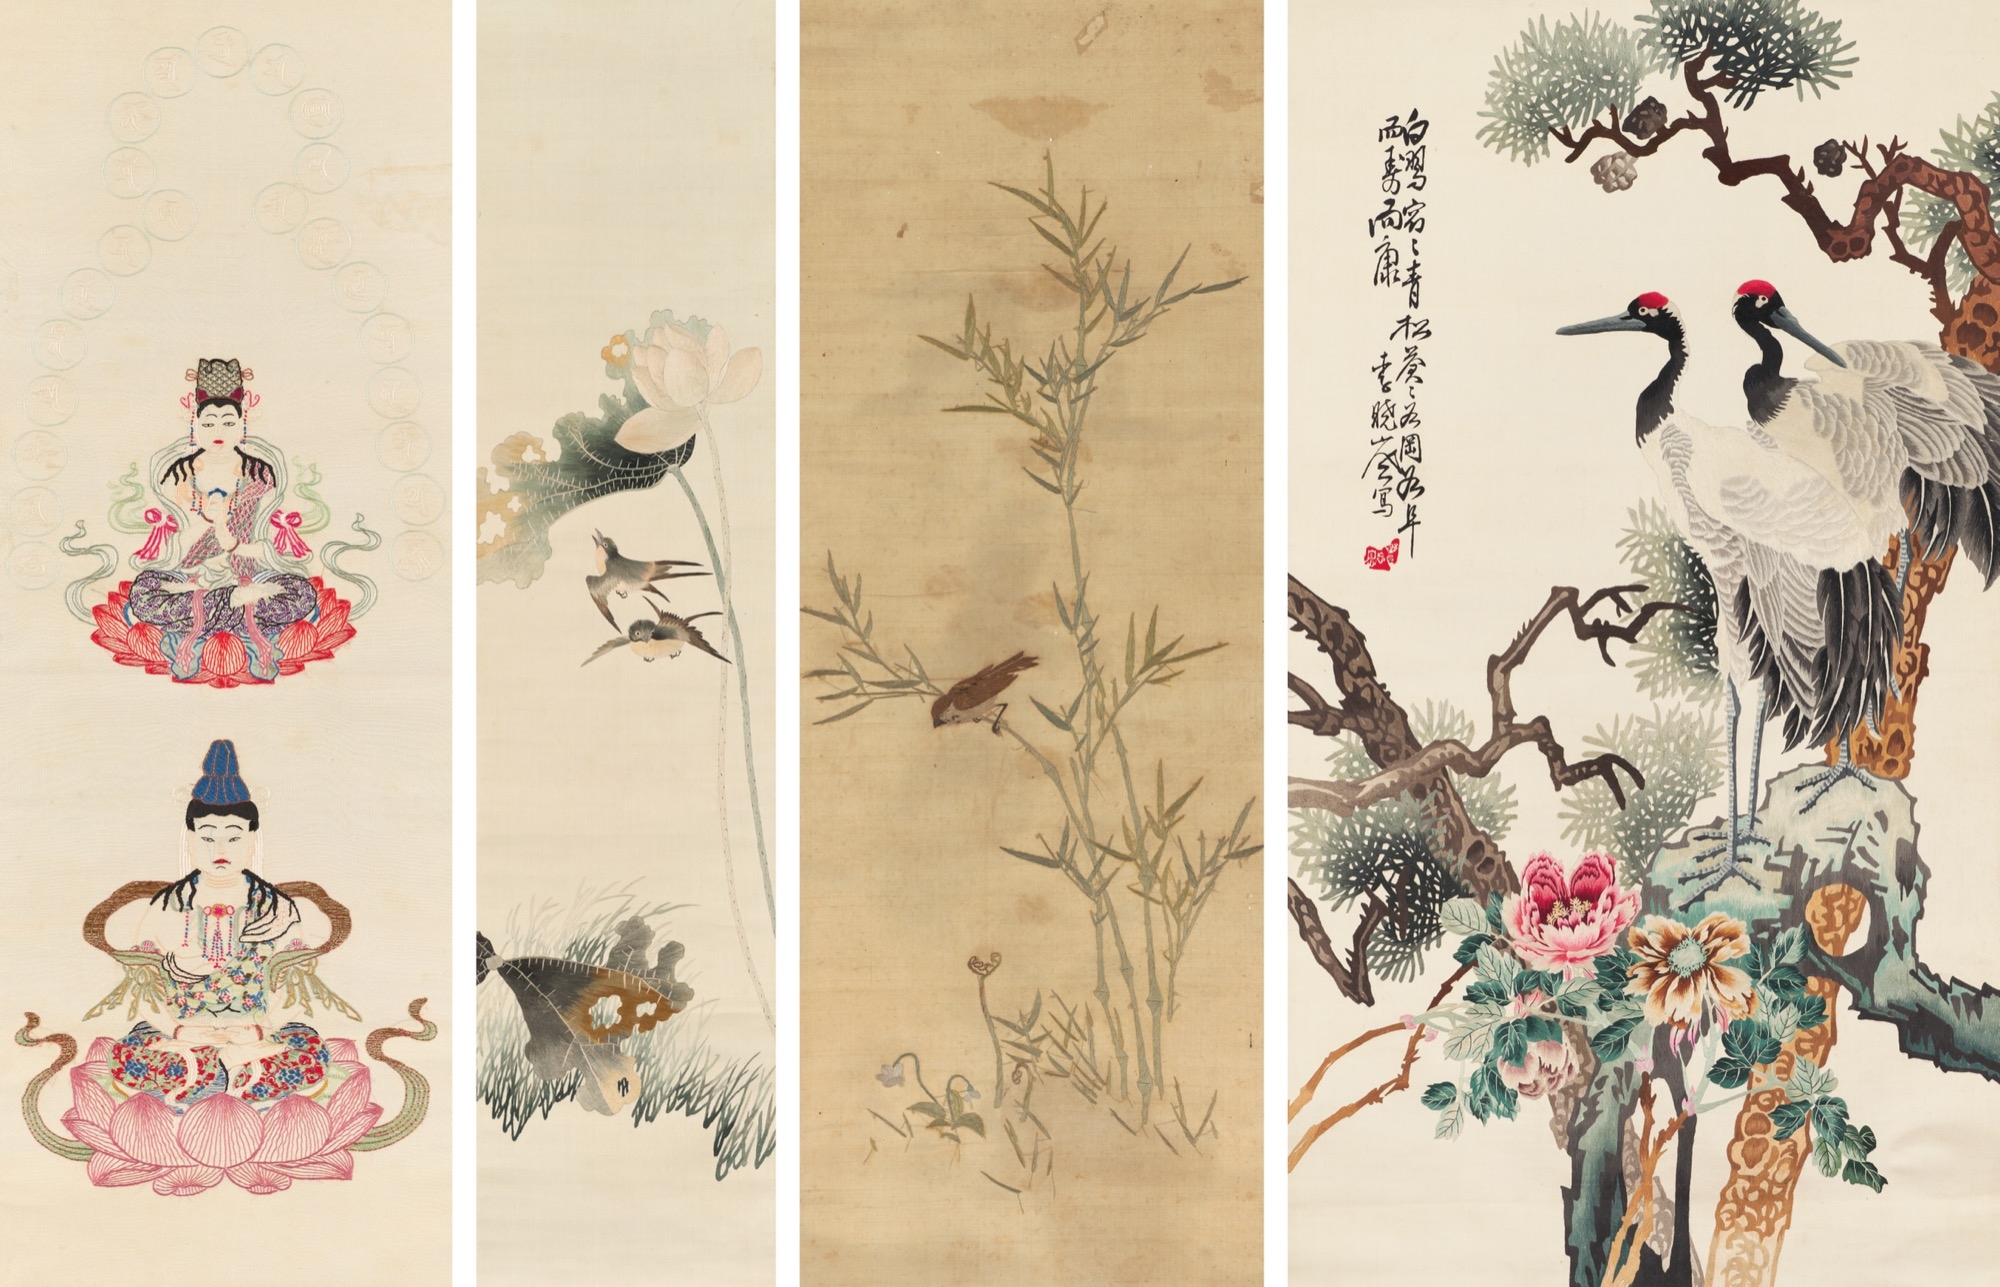 Four embroidered flower and bird statues - Li Xiaofeng